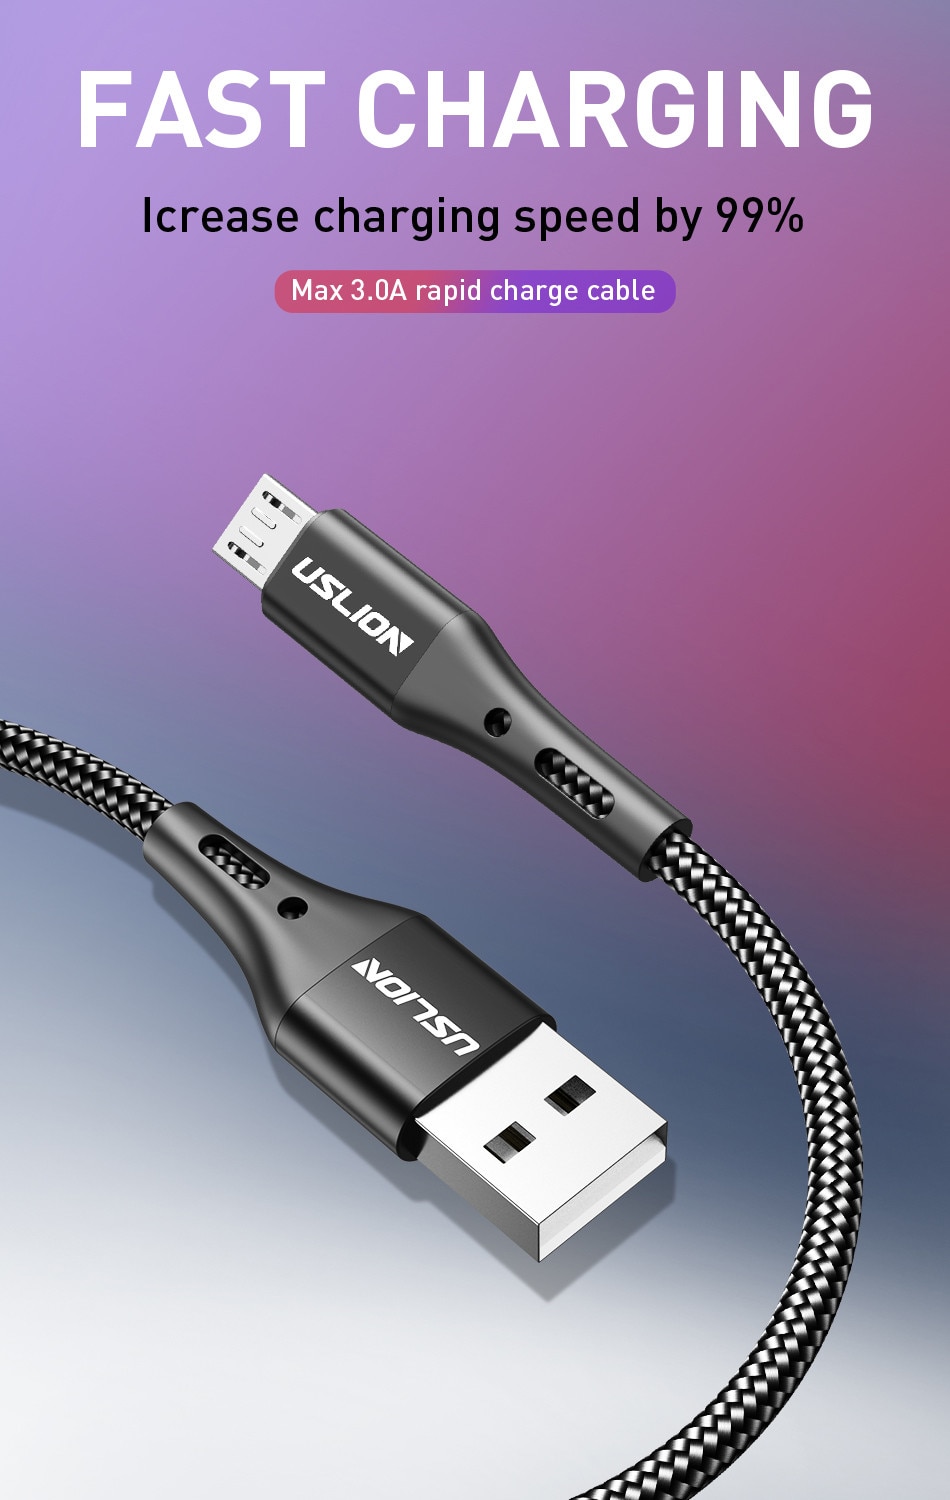 USLION 2m 3m Micro USB Cable 3A Fast Charging Data Cable for Xiaomi Redmi 4X Samsung J7 Android Mobile Phone Microusb Charger